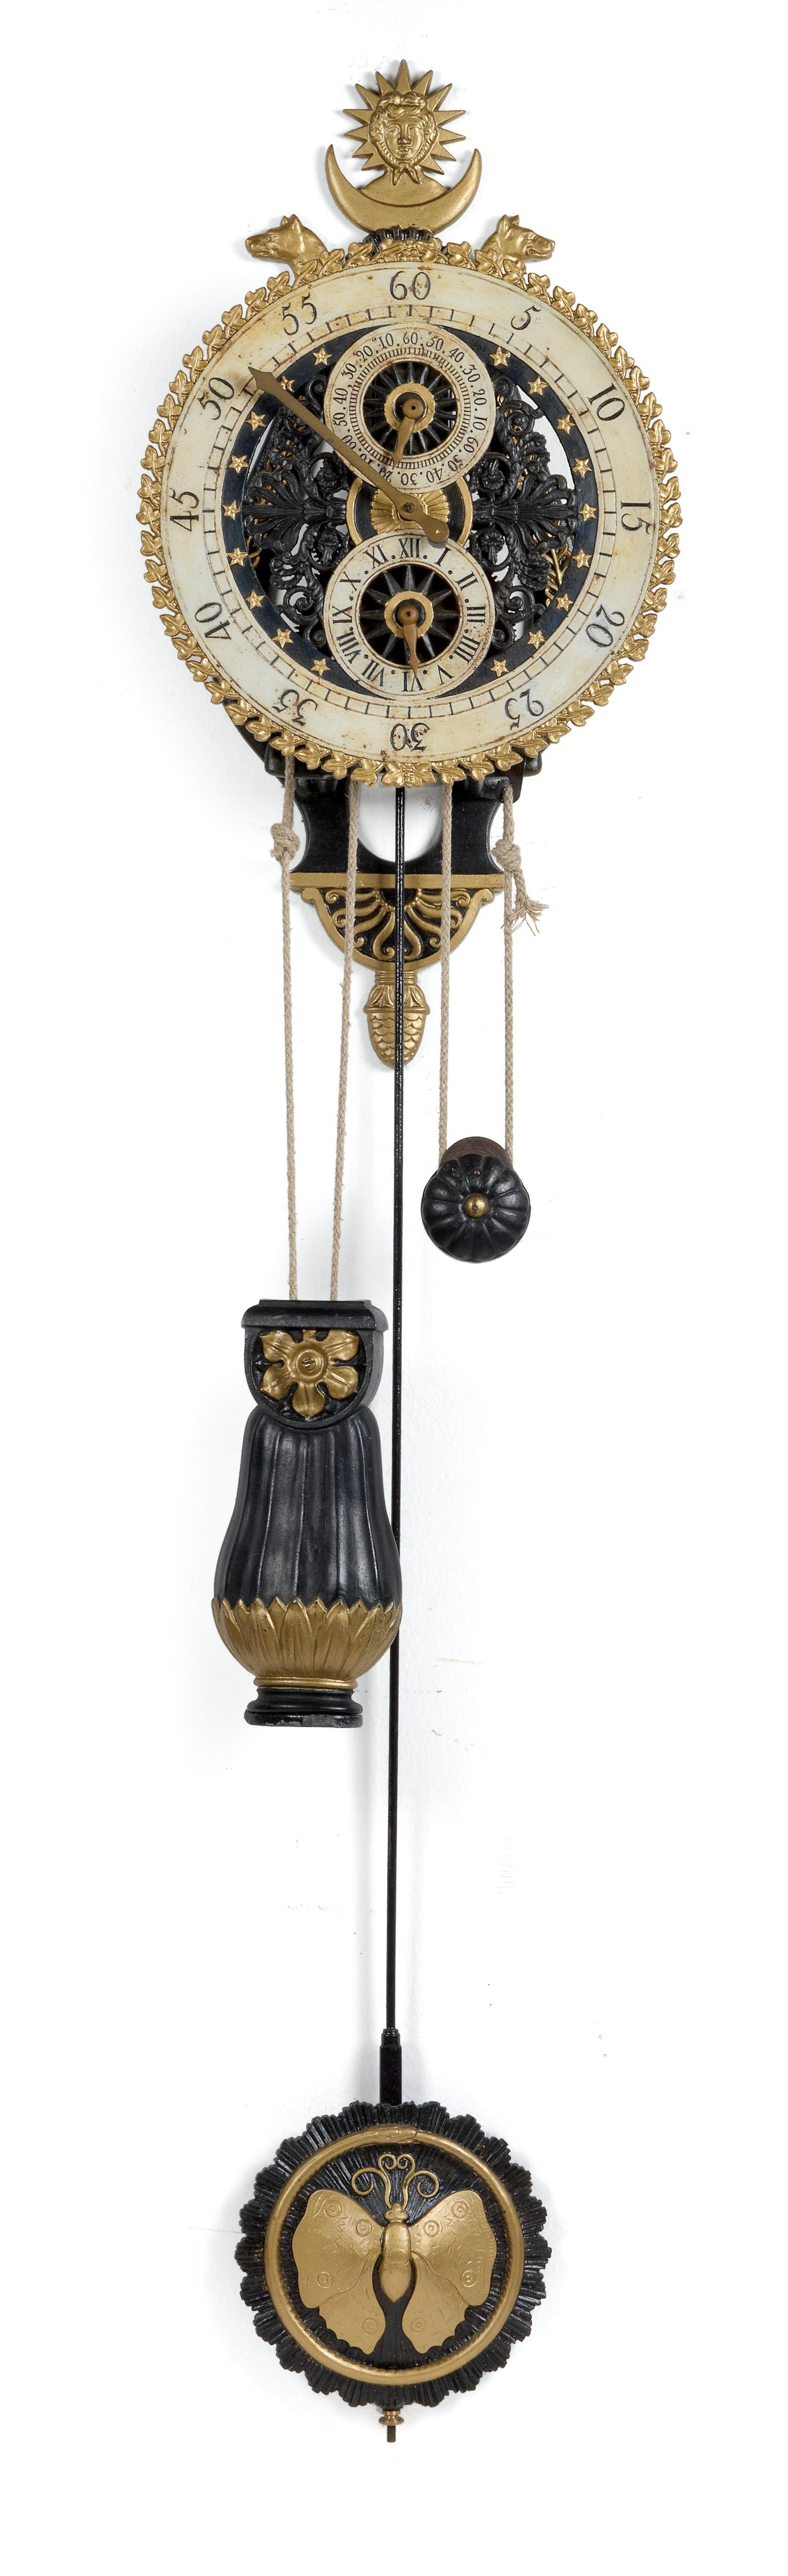 A cast iron wall pendulum clock from the french provinces